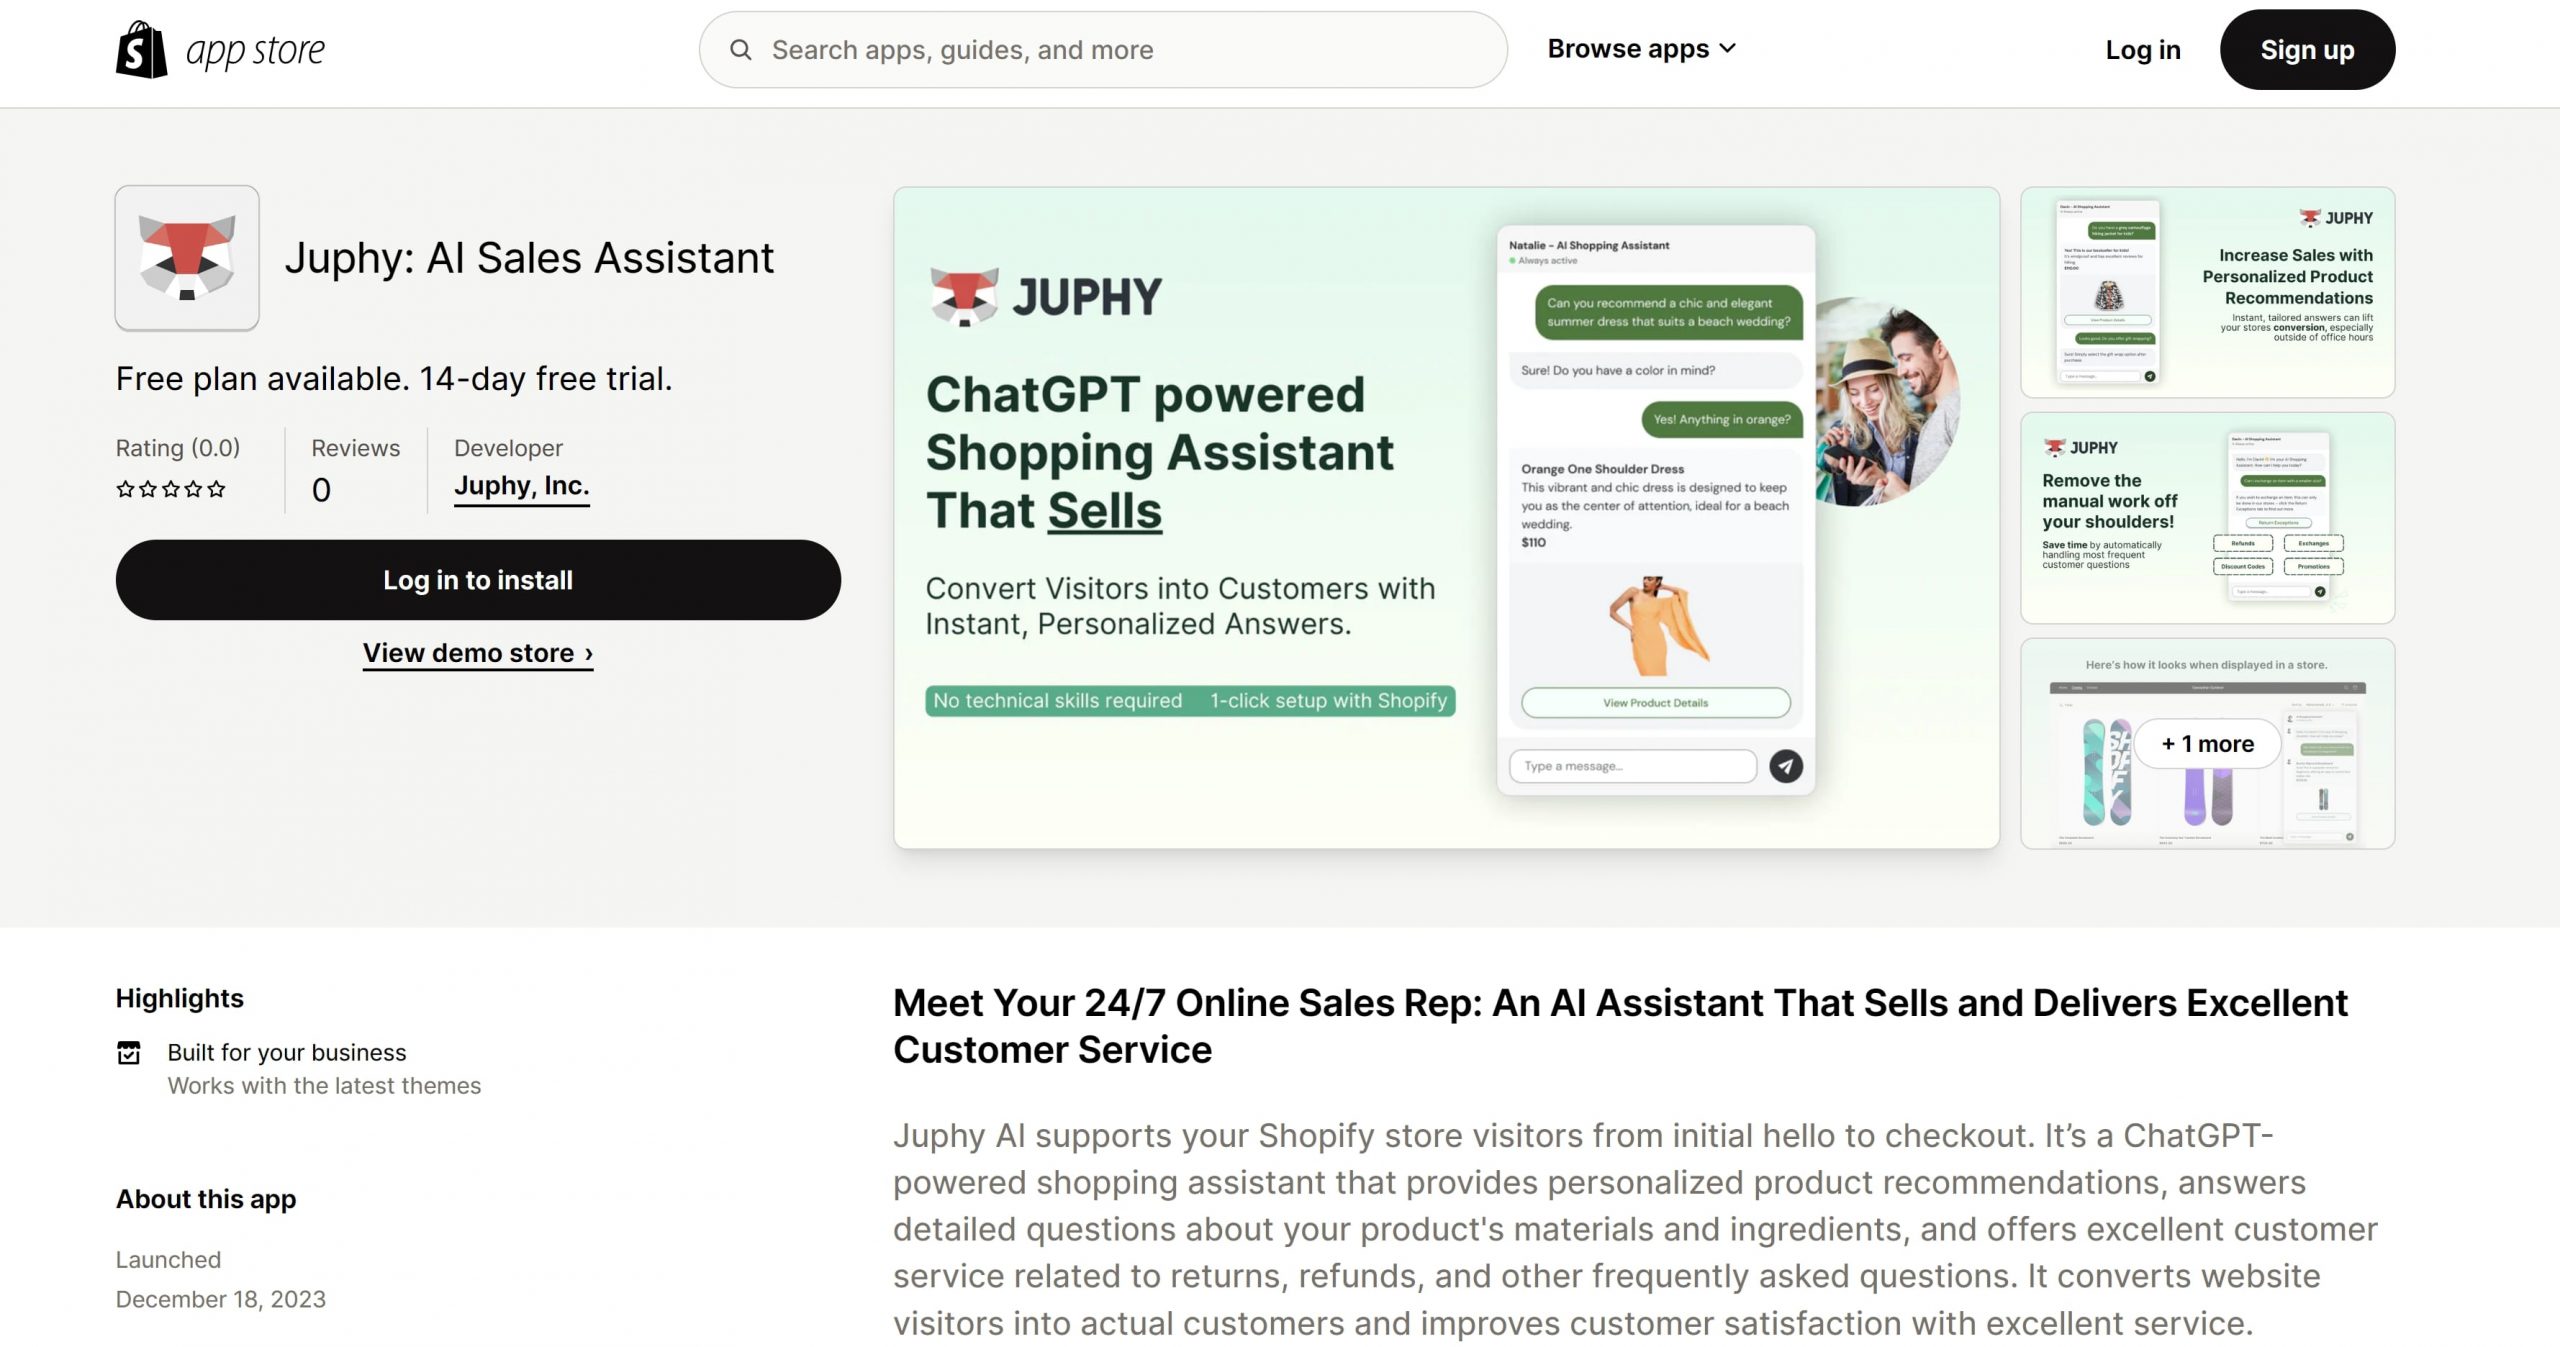 Juphy AI's Shopify App Store page